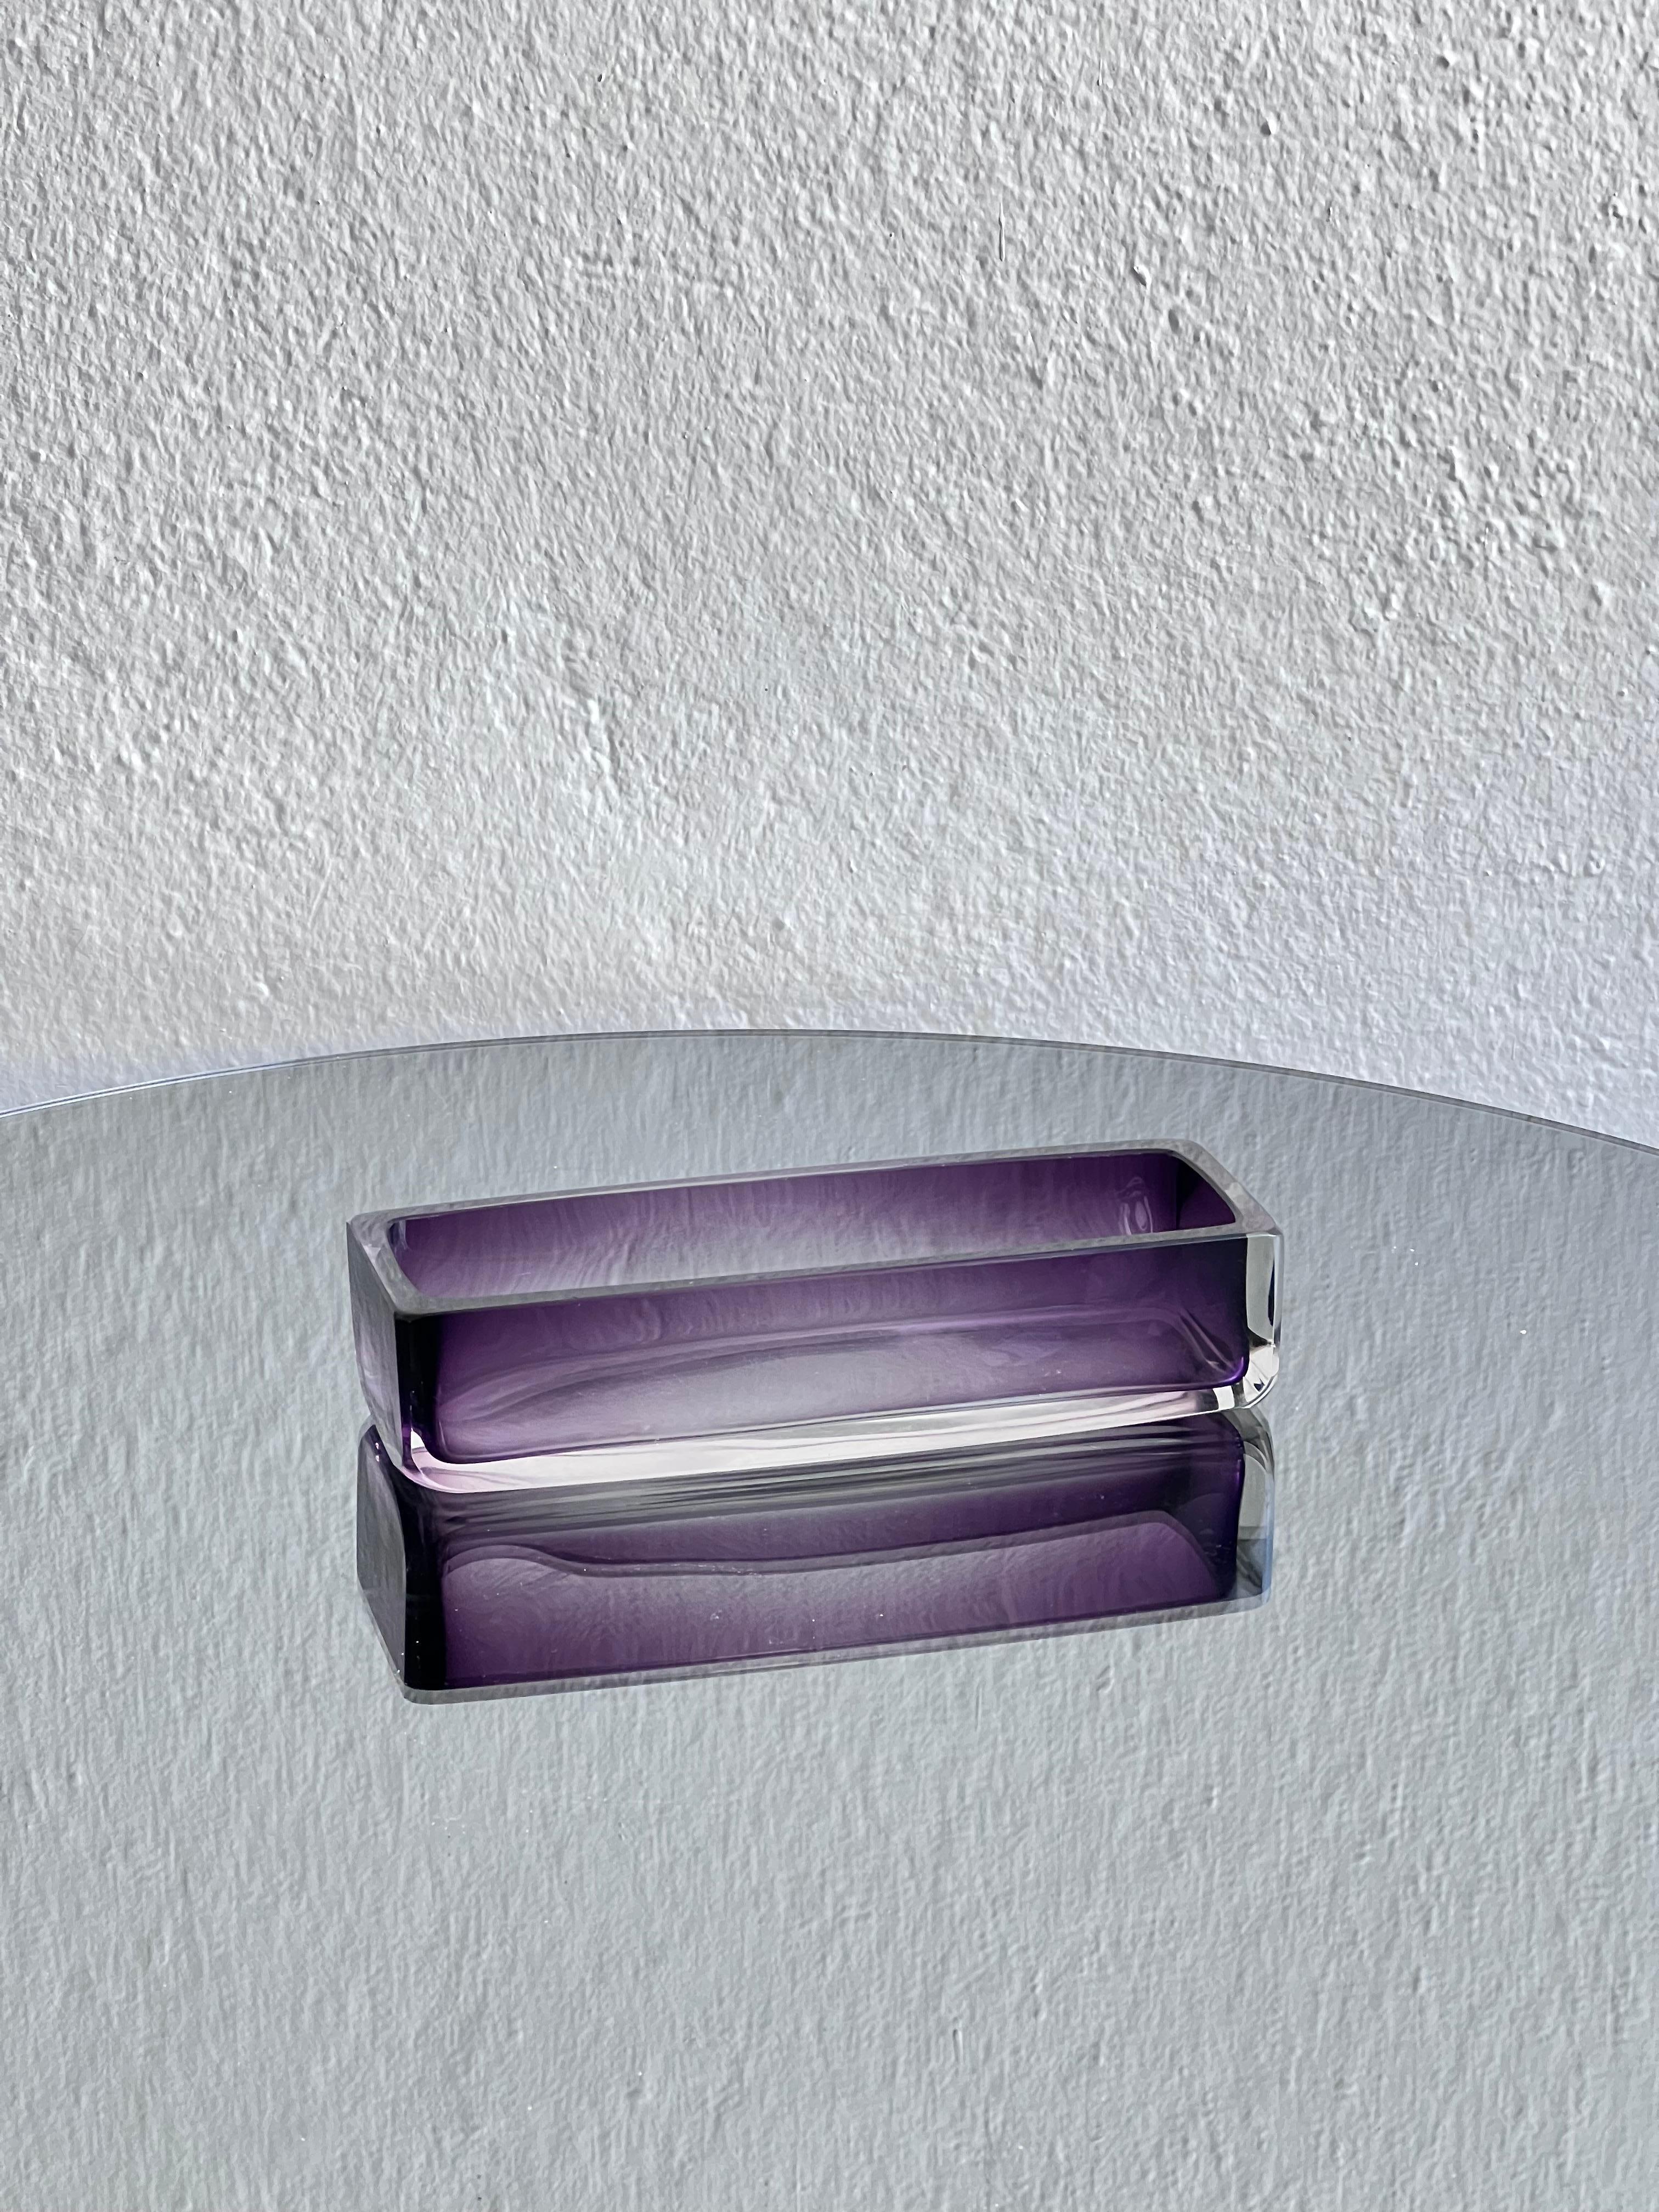 Mid-Century modern collectible glass - purple glass valet tray

A timeless and attractive valet tray / bowl in glass. Shade of purple fading towards clear, looks like a 